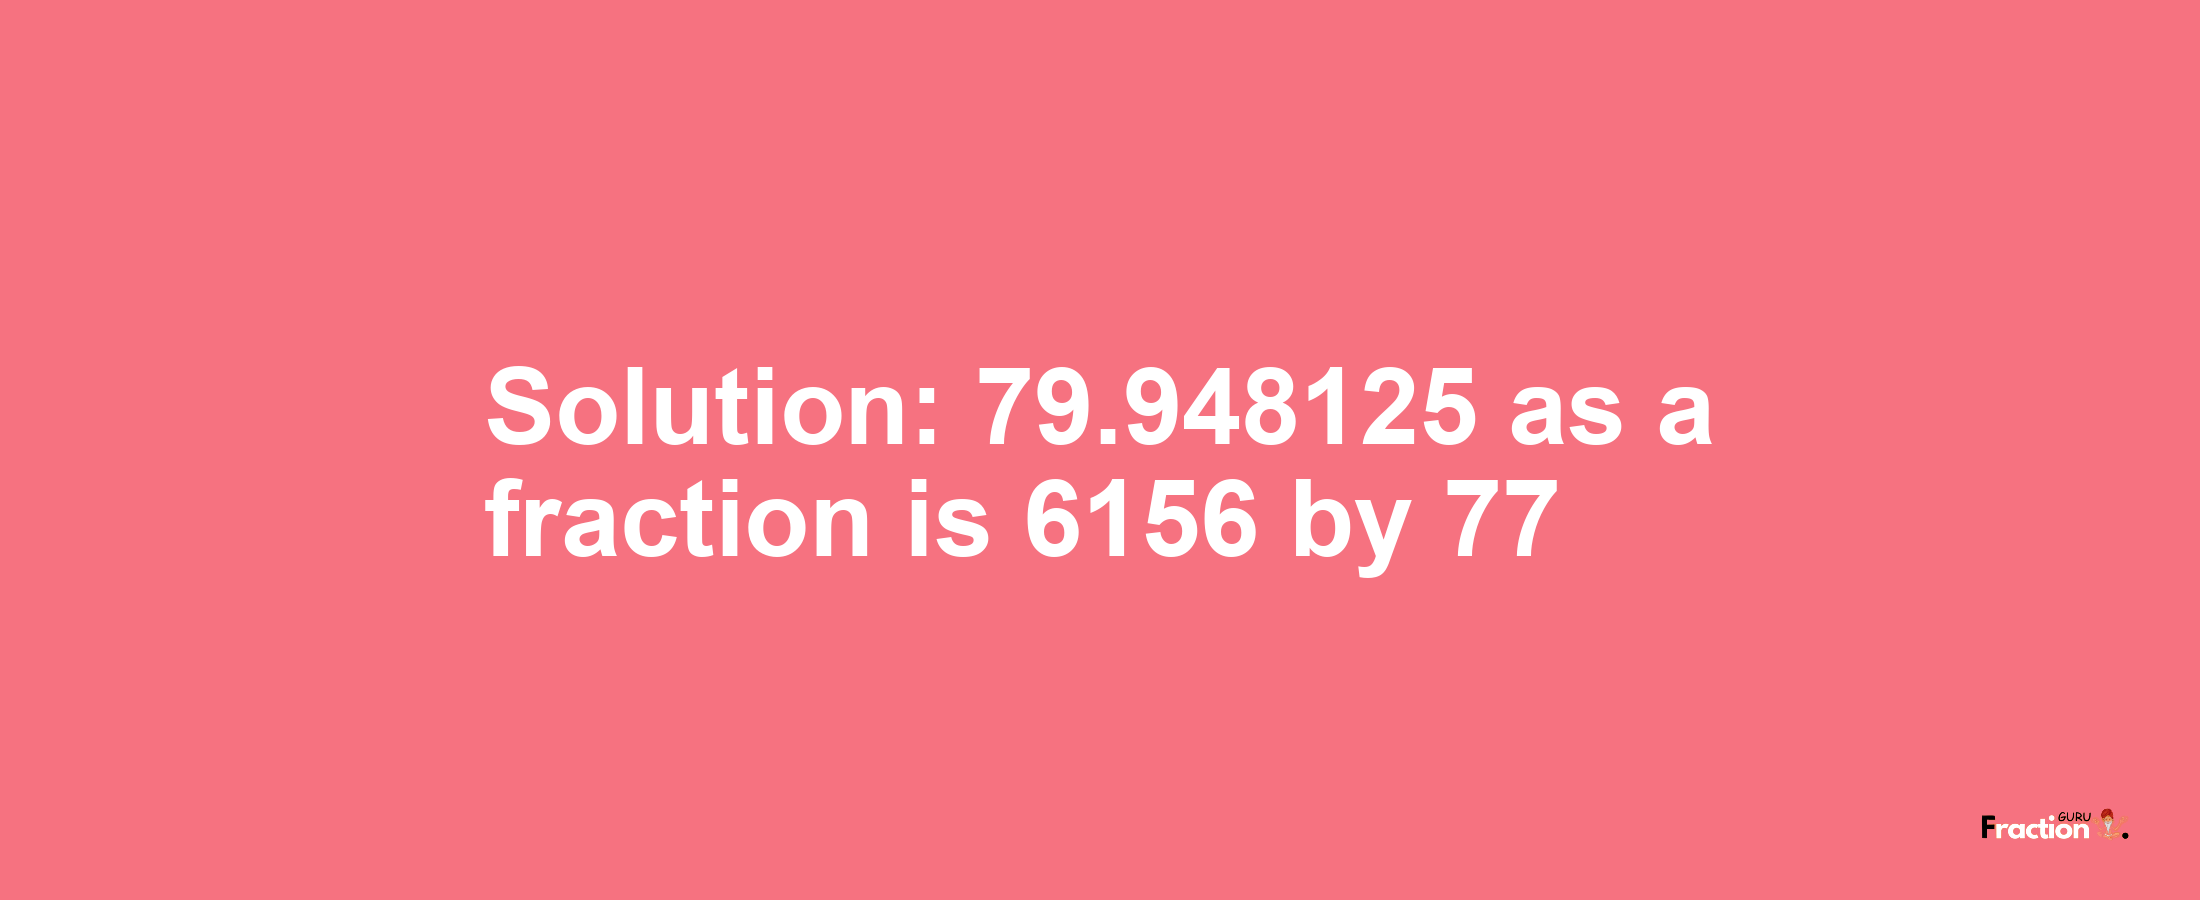 Solution:79.948125 as a fraction is 6156/77